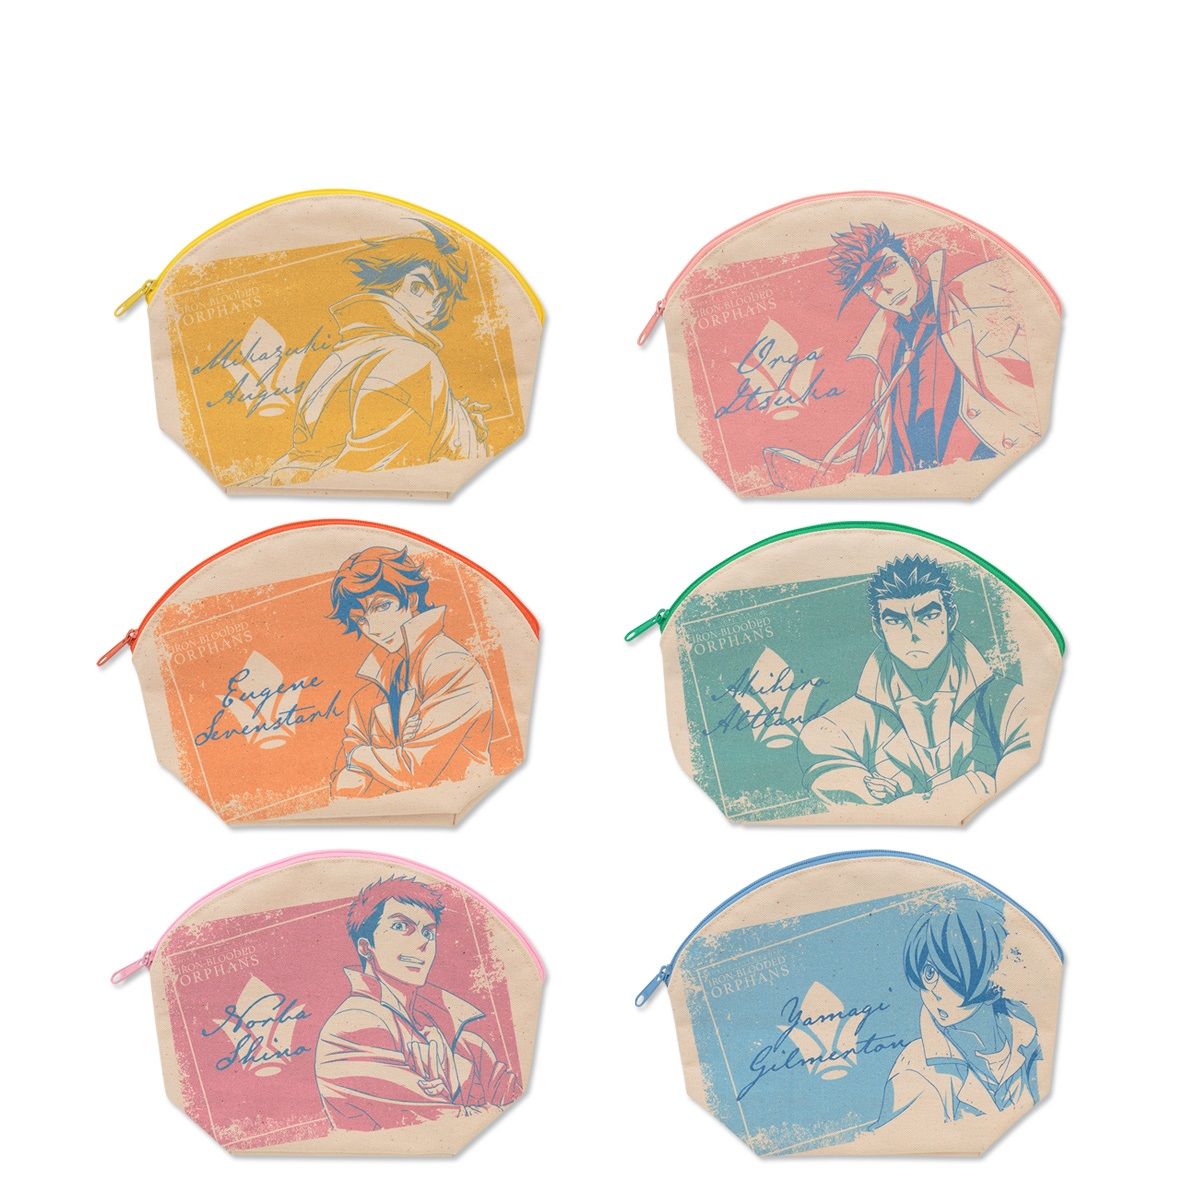 Mobile Suit Gundam: Iron-Blooded Orphans Tricolor-themed Pouch